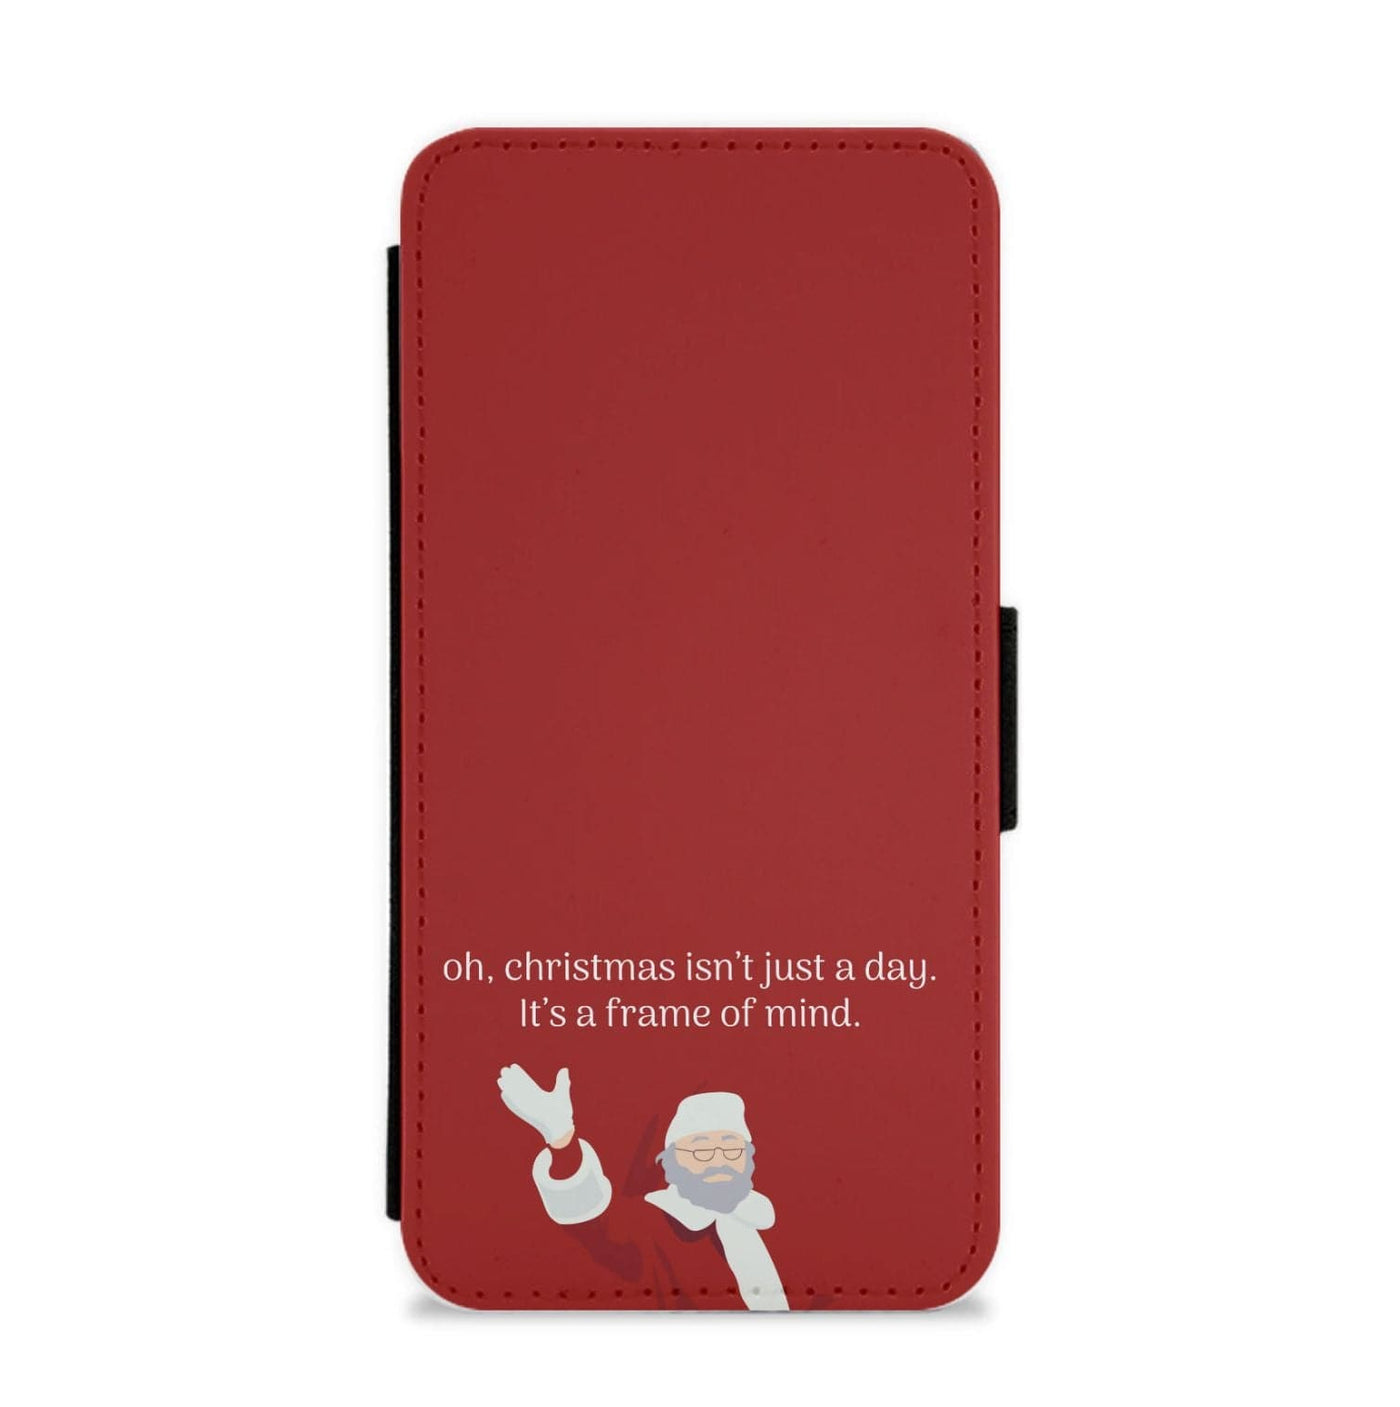 Christmas Isn't Just A Day - Christmas Flip / Wallet Phone Case